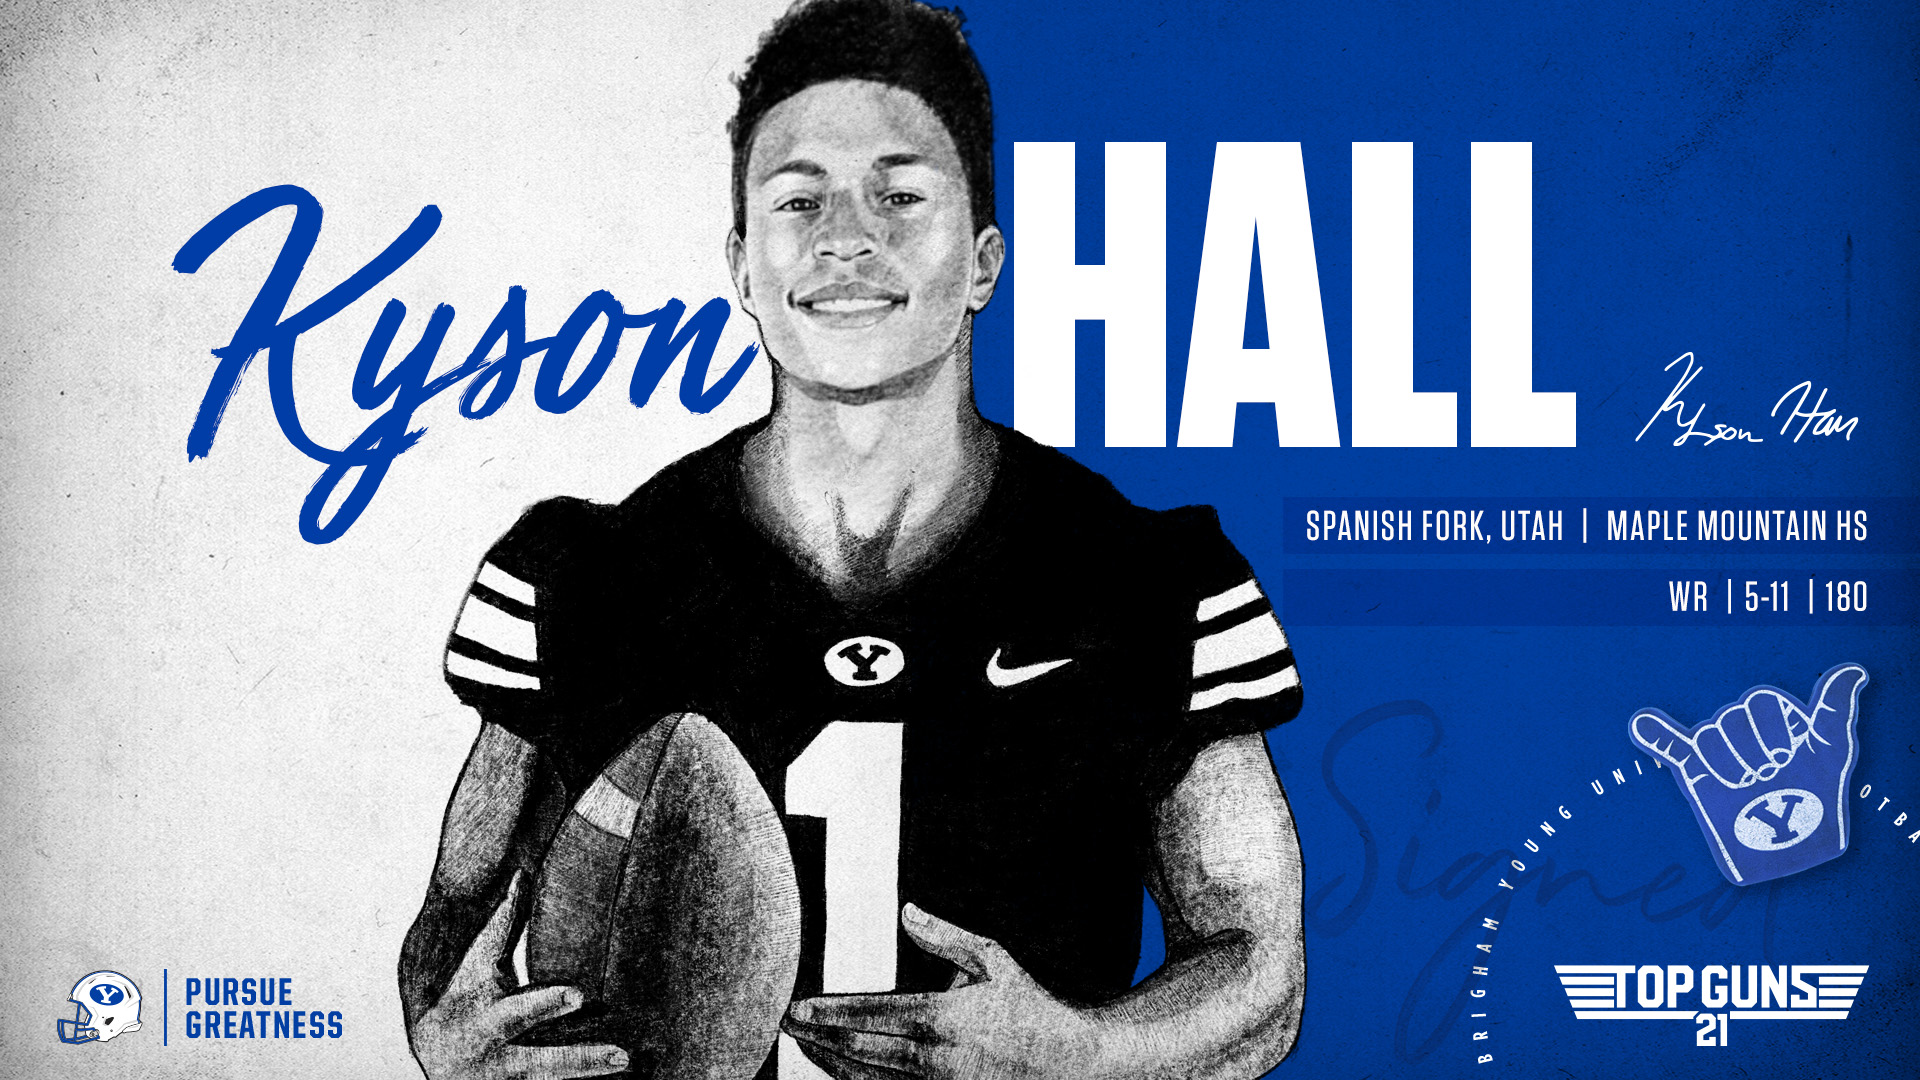 Kyson Hall signs with BYU